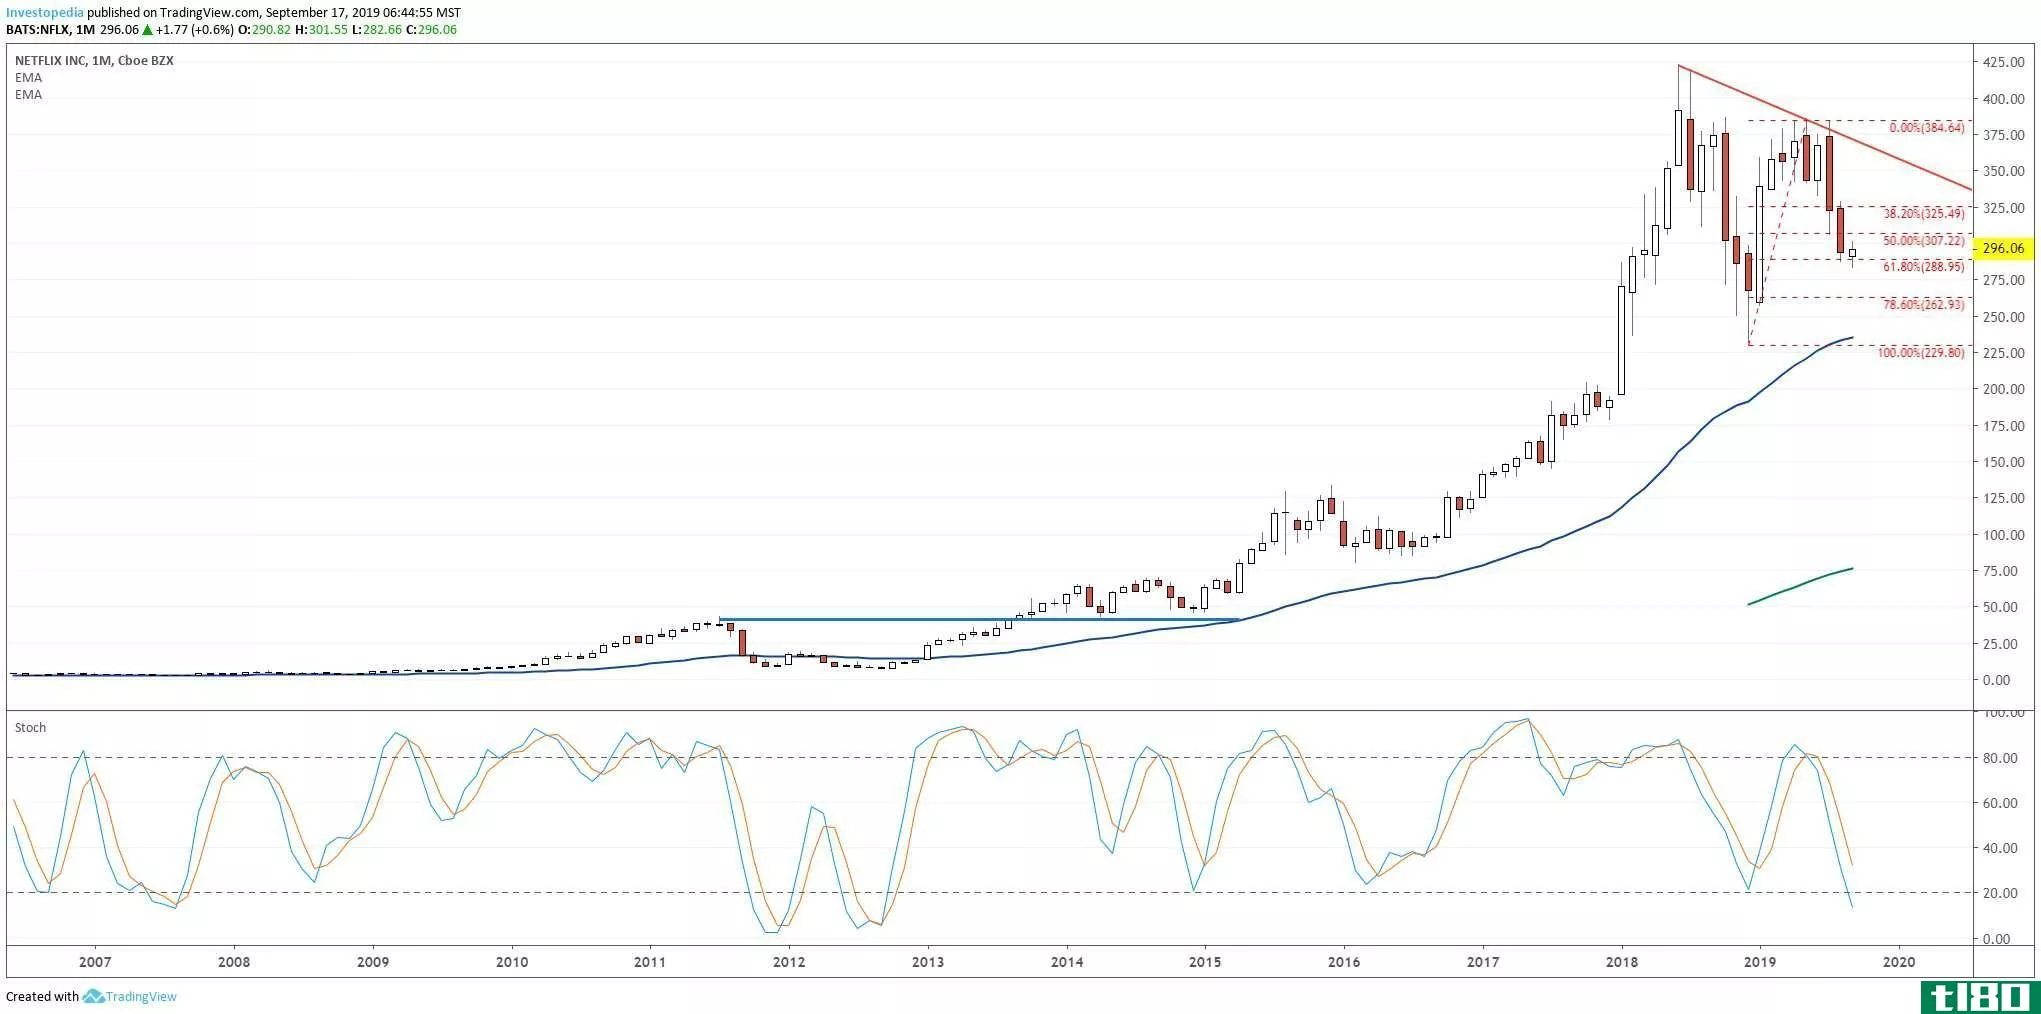 Monthly chart showing the share price performance of Netflix, Inc. (NFLX)